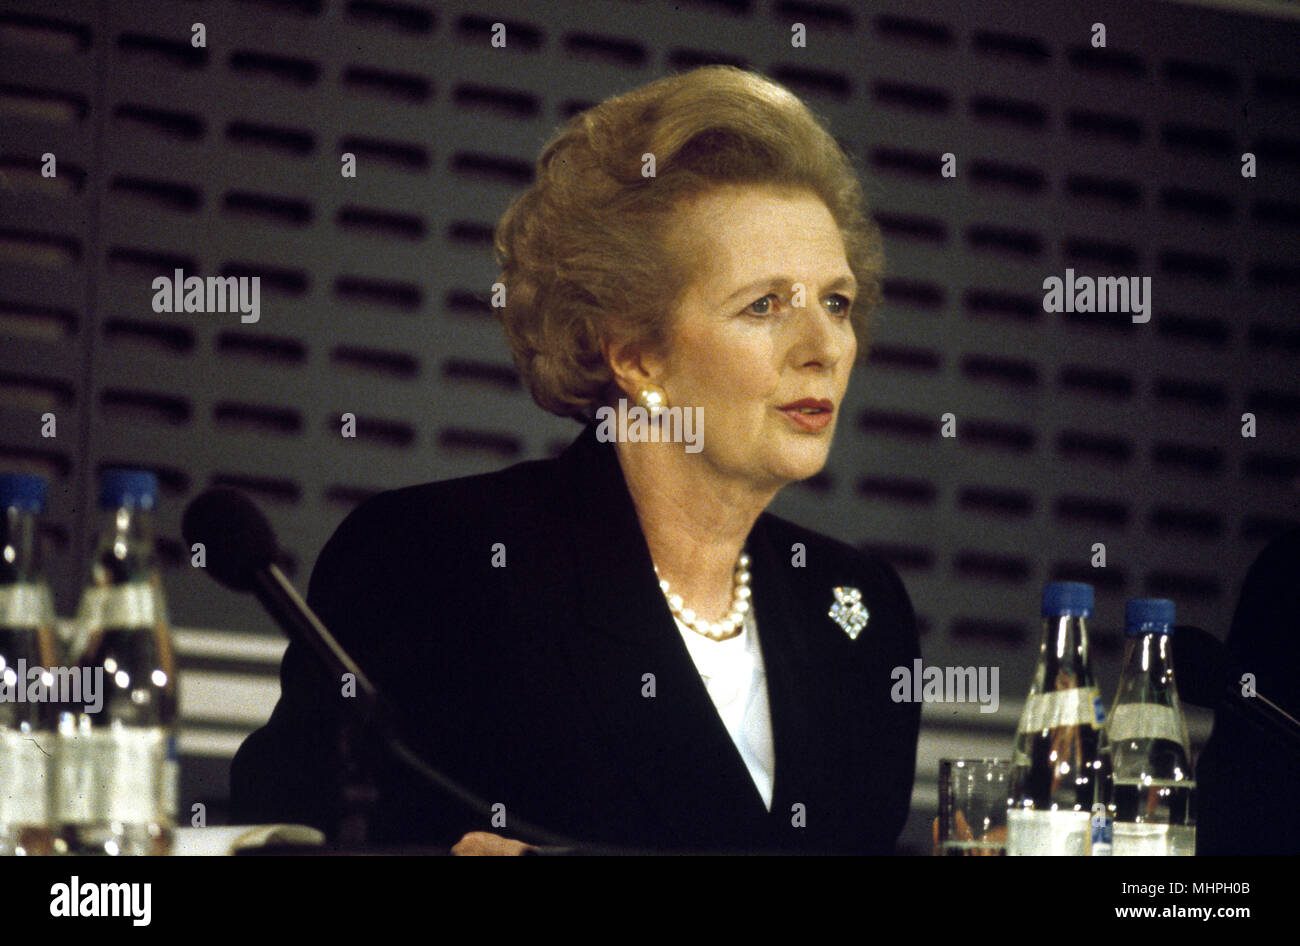 Margaret Thatcher, British Prime Minister, at a press conference in London, soon after an important visit by Mikhail Gorbachev, Russian President.        Date: circa 1984 Stock Photo